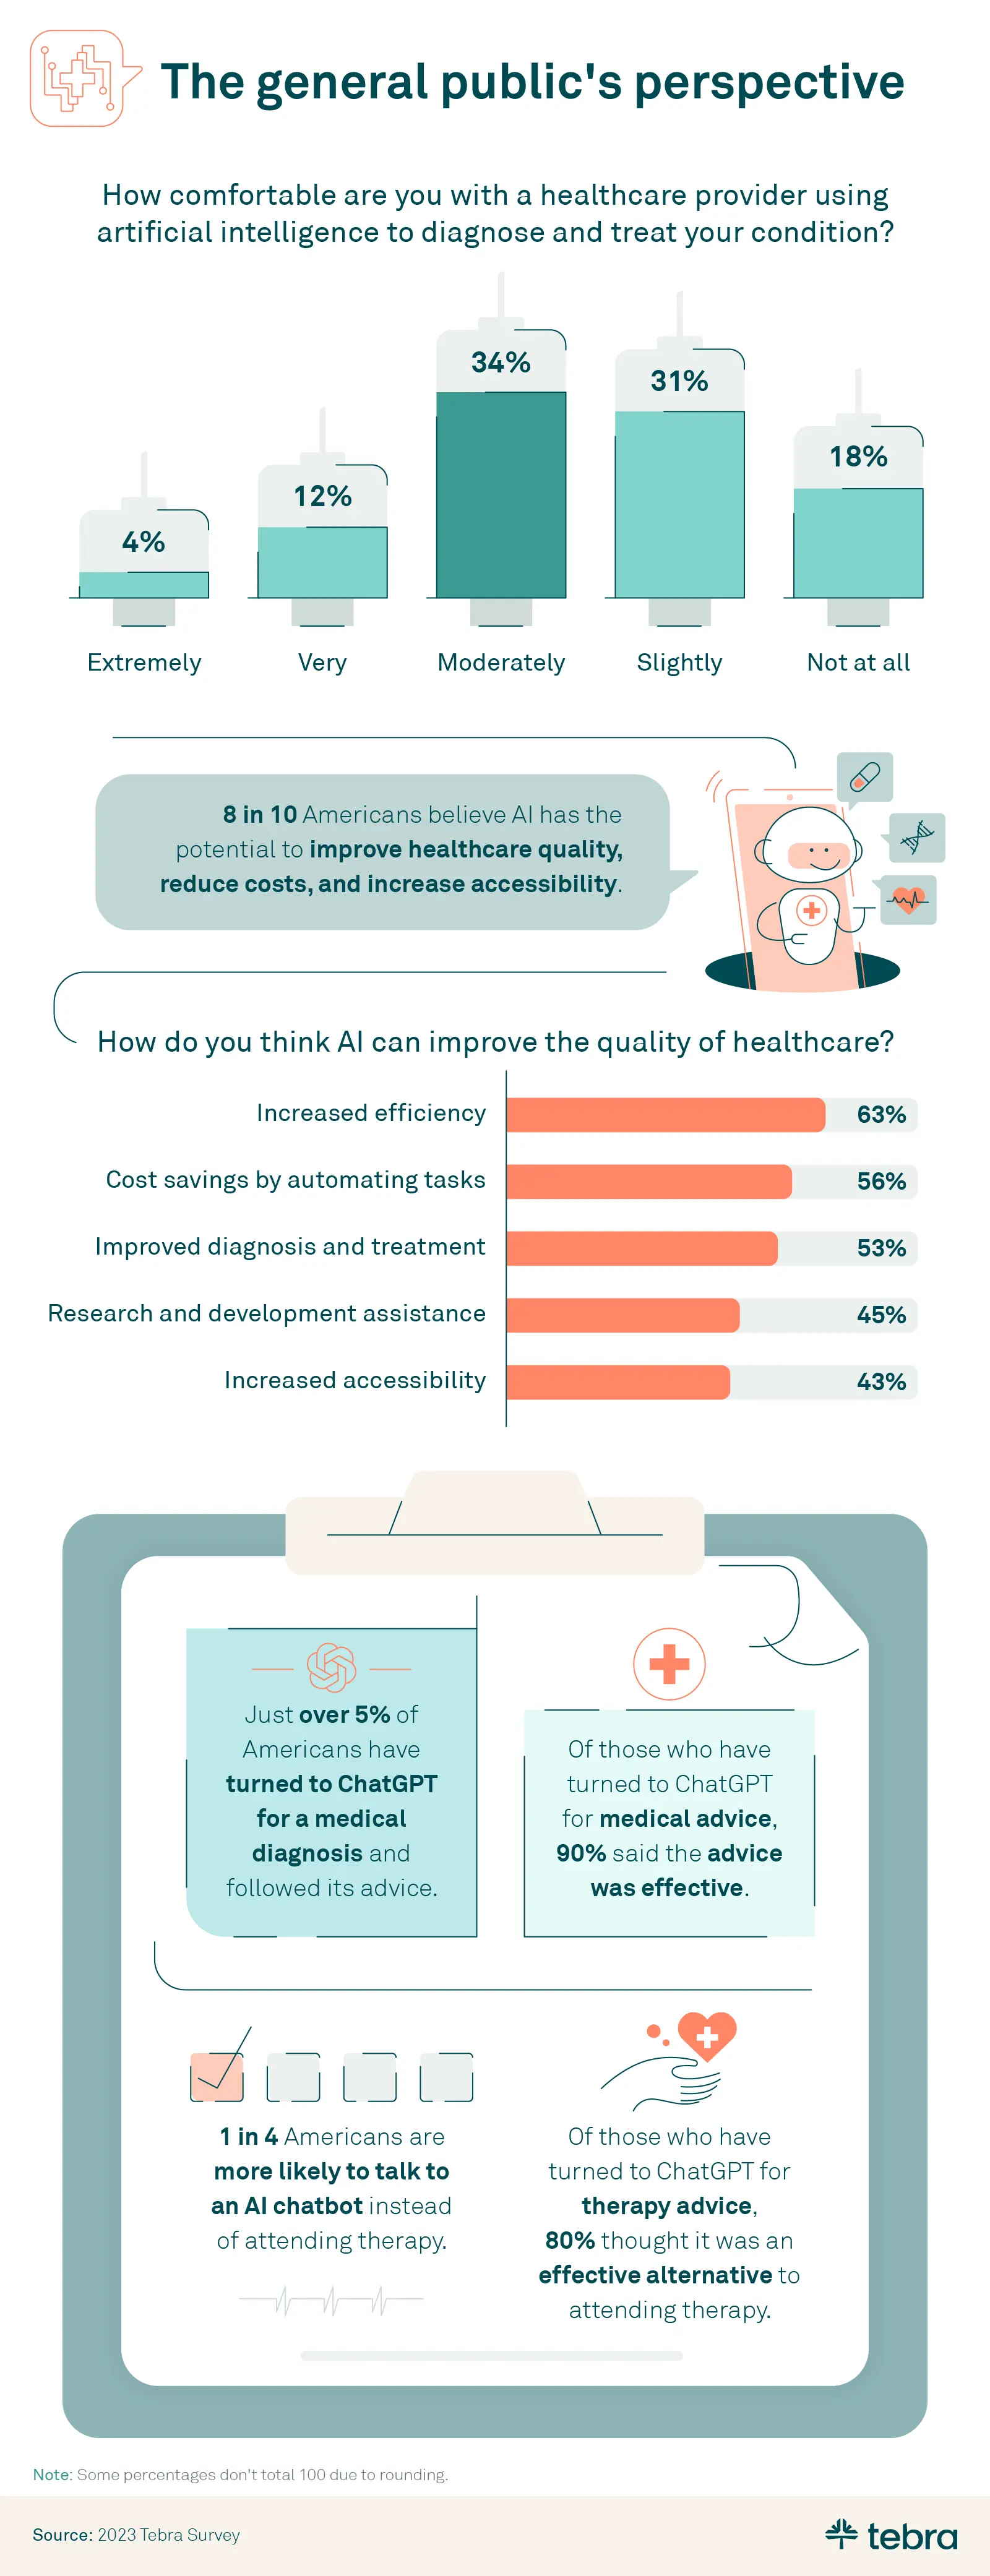 This is an infographic about Tebra research around the topic of AI in healthcare. The infographic is titled &quot;The general public's perspective.&quot; 34% of respondents are comfortable with AI diagnosing and treating health conditions accurately. 8 in 10 Americans believe that artificial intelligence has the potential to improve the quality of healthcare, reduce costs, and increase accessibility. Just over 5% of Americans have used ChatGPT for a medical diagnosis and followed its advice. Of those who have already turned to ChatGPT for medical advice, 90% felt it was effective. One-quarter of Americans said they’d prefer talking to an AI chatbot over a human therapist. Of those who have already turned to ChatGPT for therapy advice, 80% felt it was an effective alternative to attending therapy.